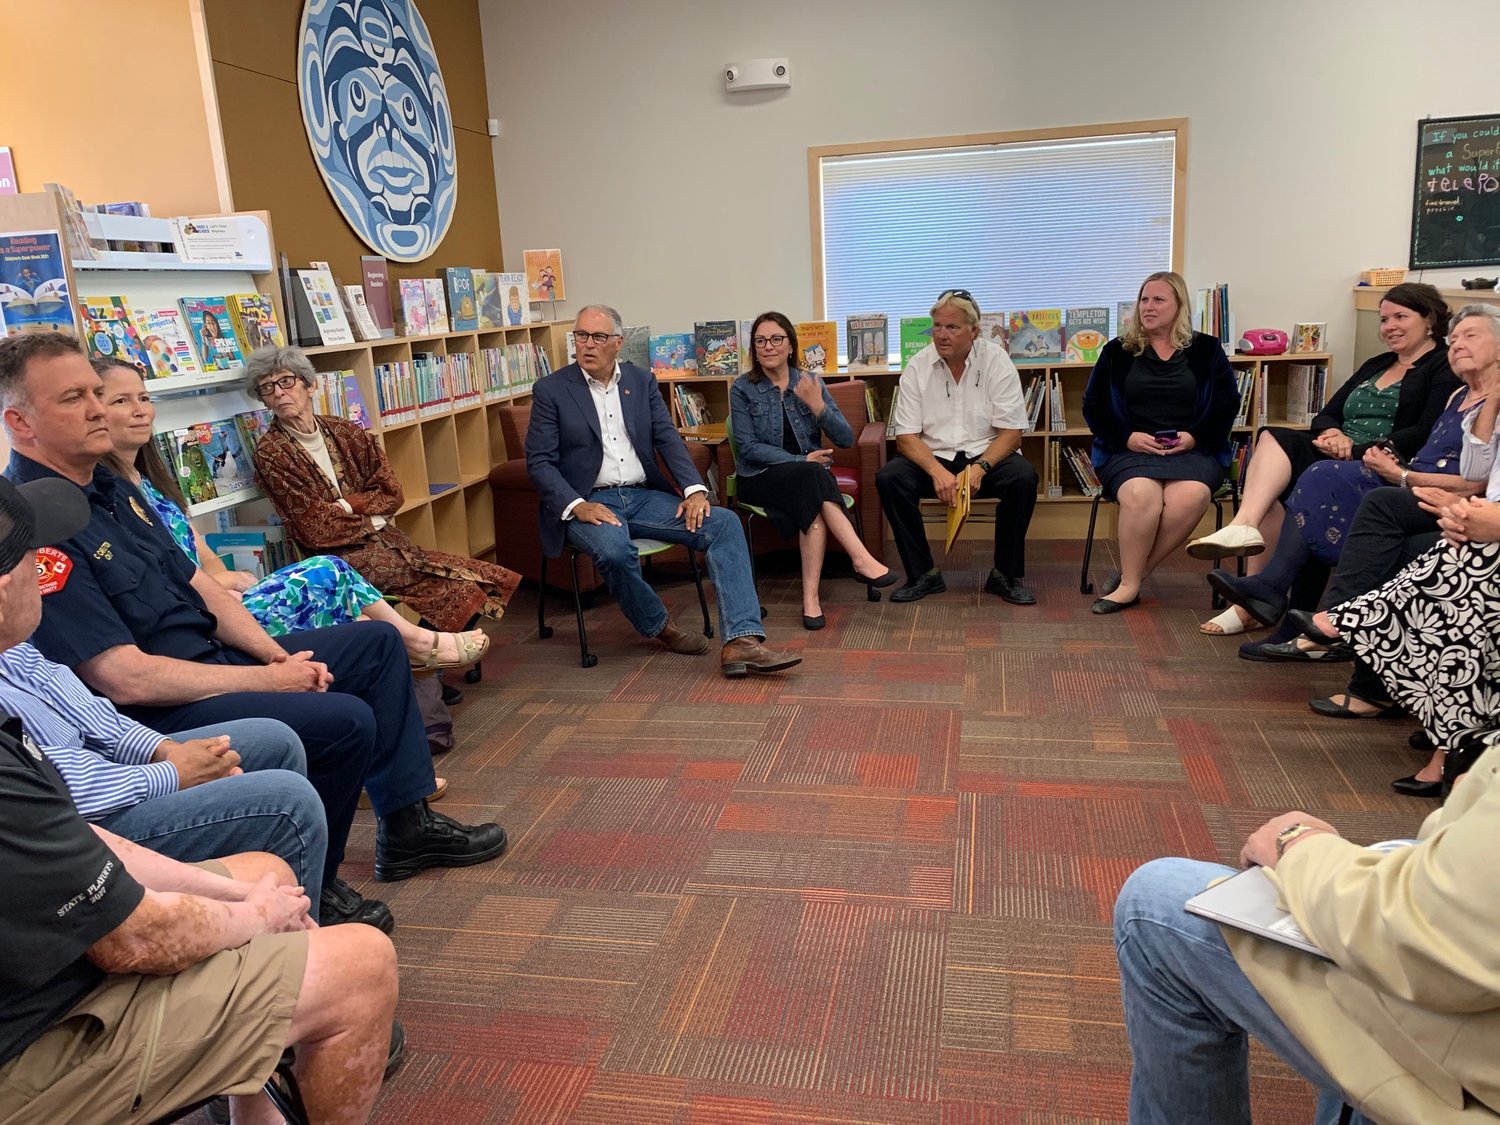 Governor Jay Inslee, congresswoman Suzan DelBene and state representatives Alicia Rule and Sharon Shewmake meet with a group at the library.